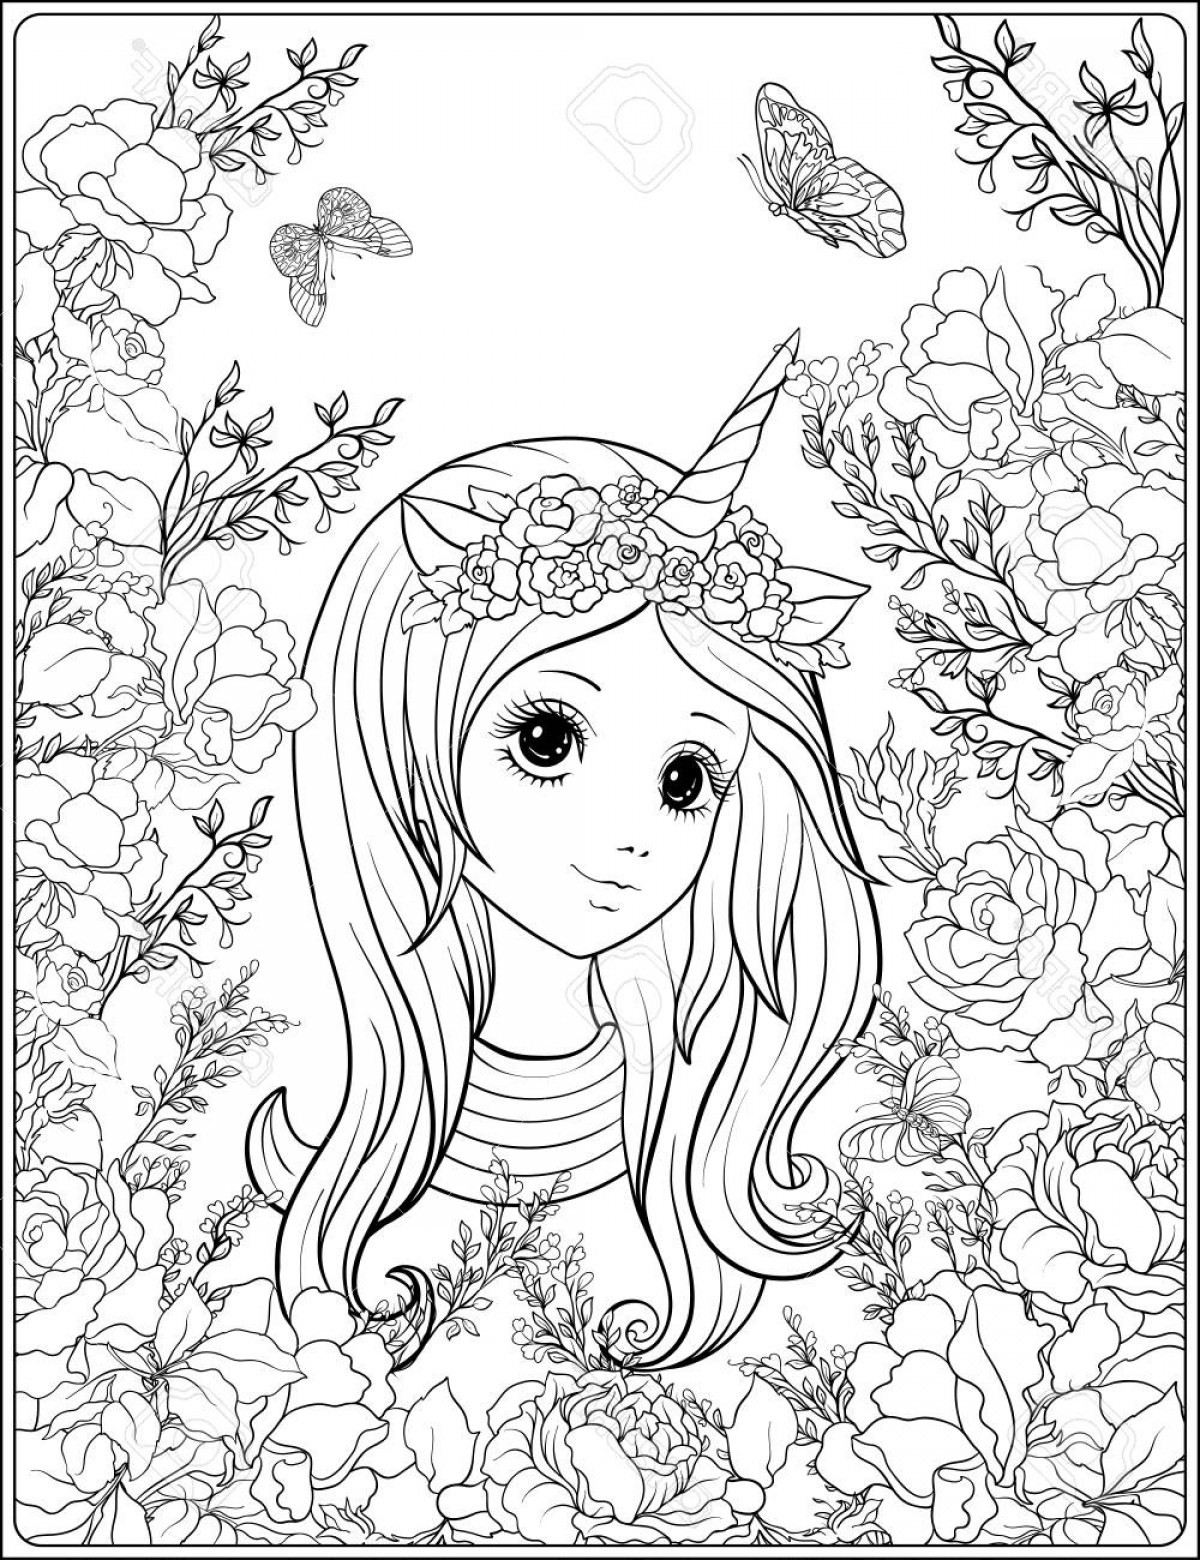 Girl Unicorn Coloring Pages
 Unicorn Horn Outline Vector